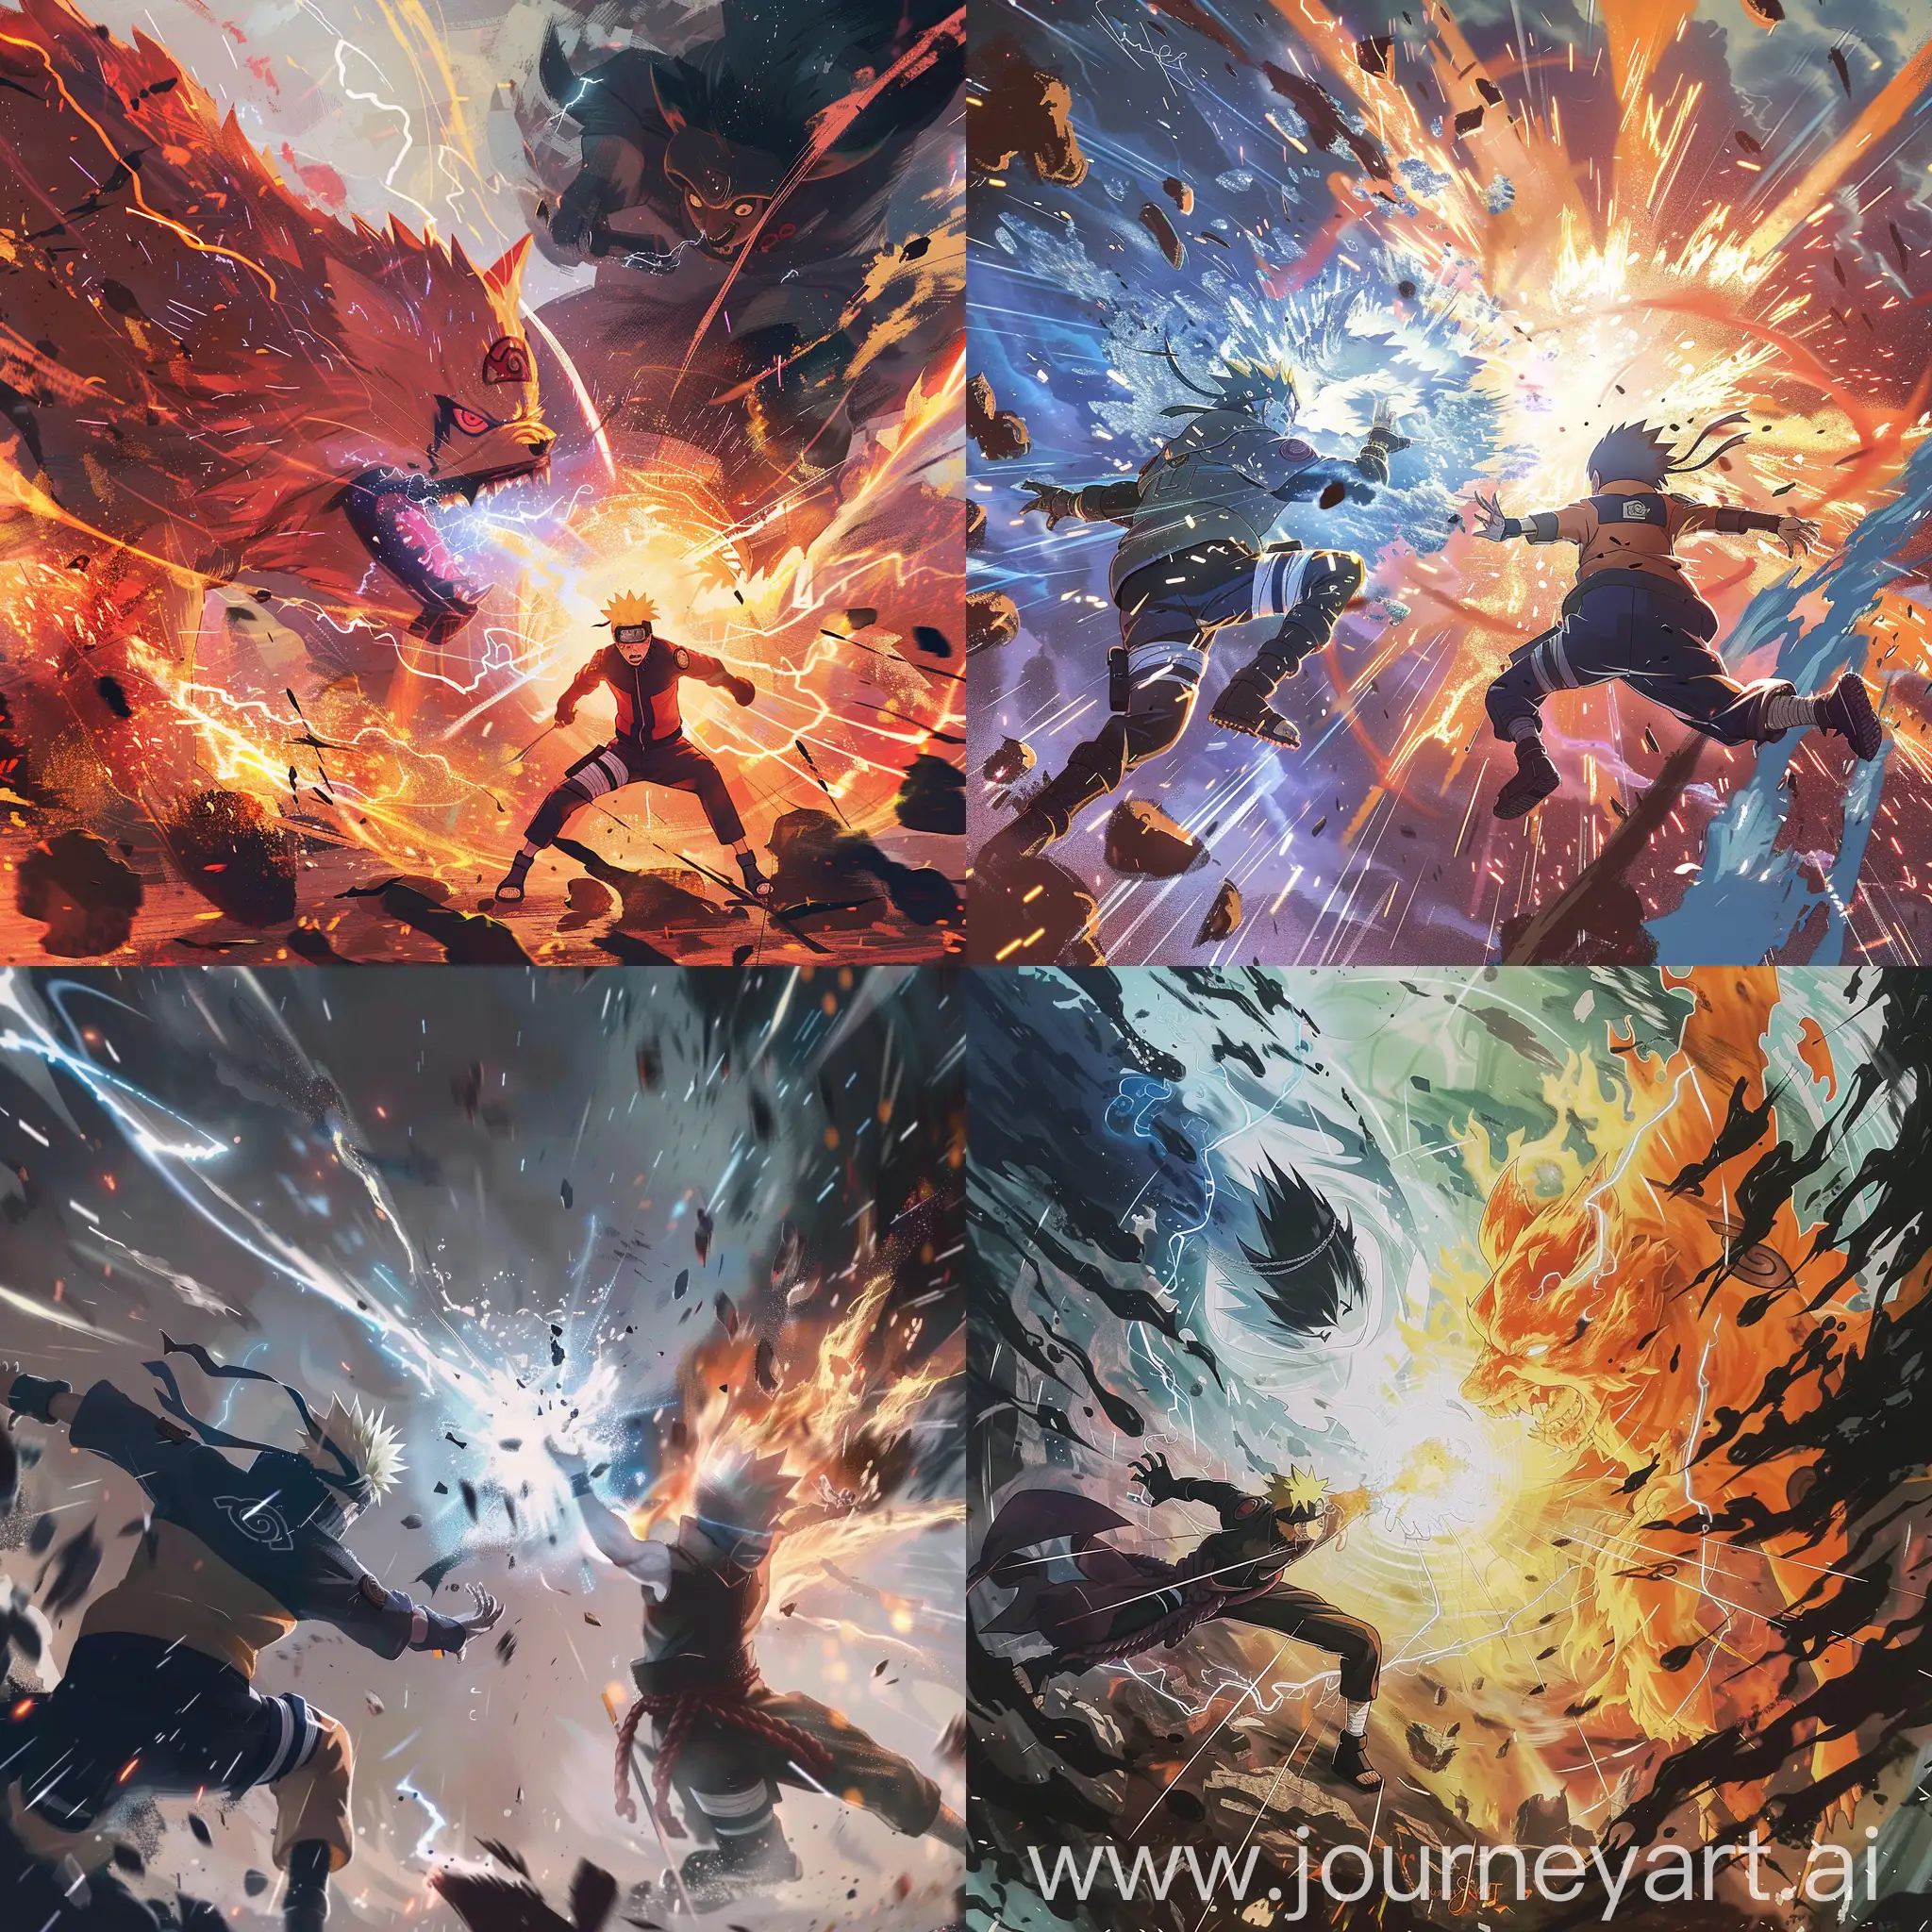 Design  an  intense  anime  art  piece  capturing  a  climactic  battle  between  two  powerful  characters naruto,  with  dynamic  poses  and  impactful  special  effects